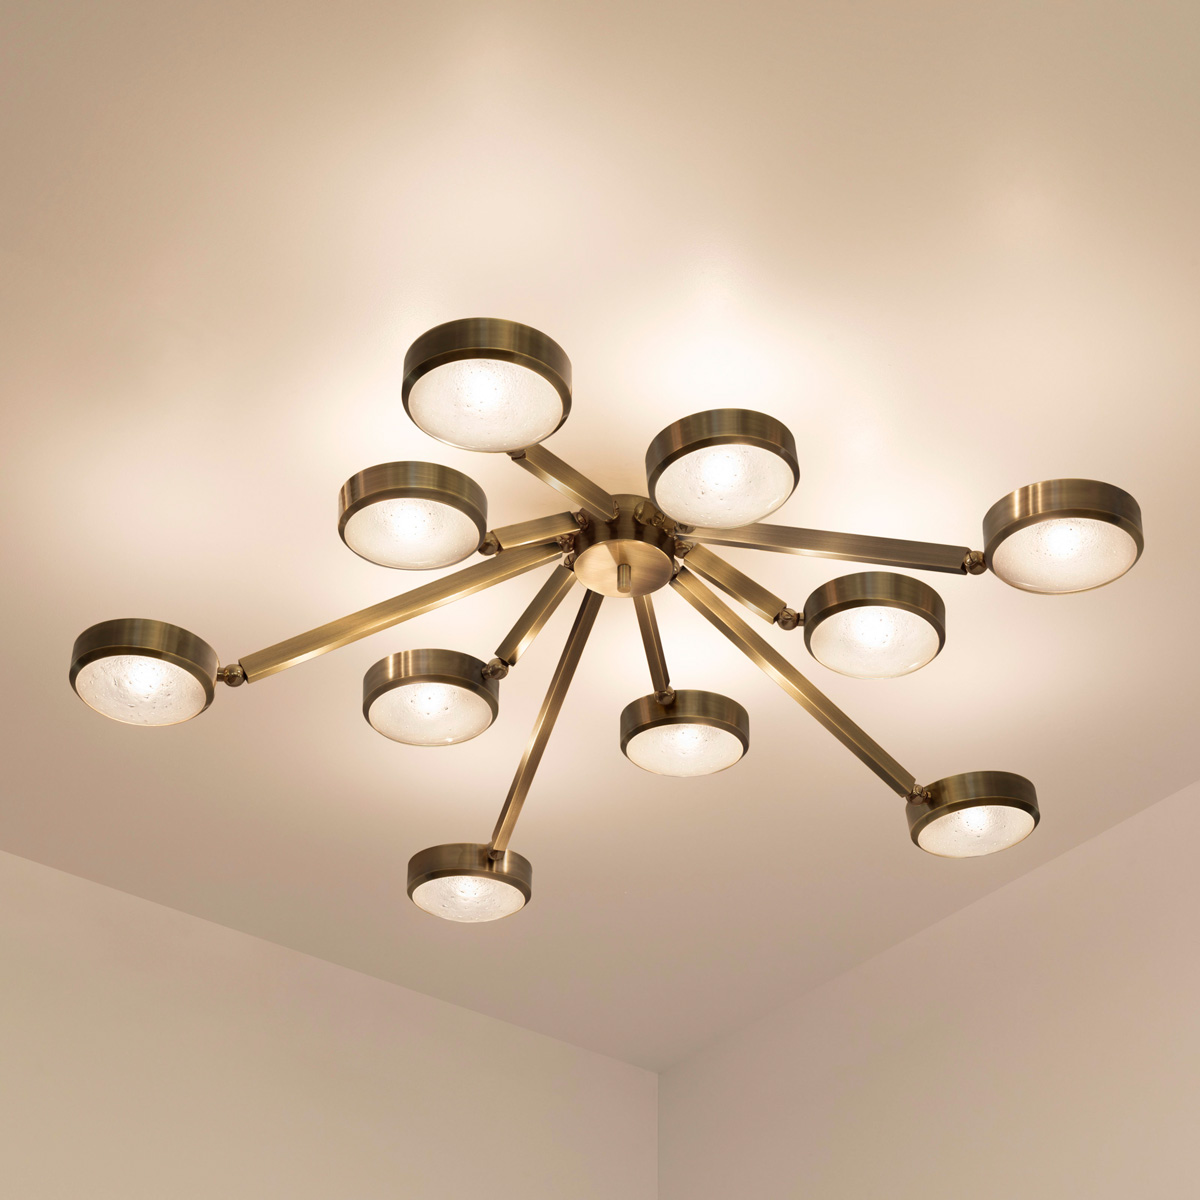 oculus ceiling light by gaspare asaro